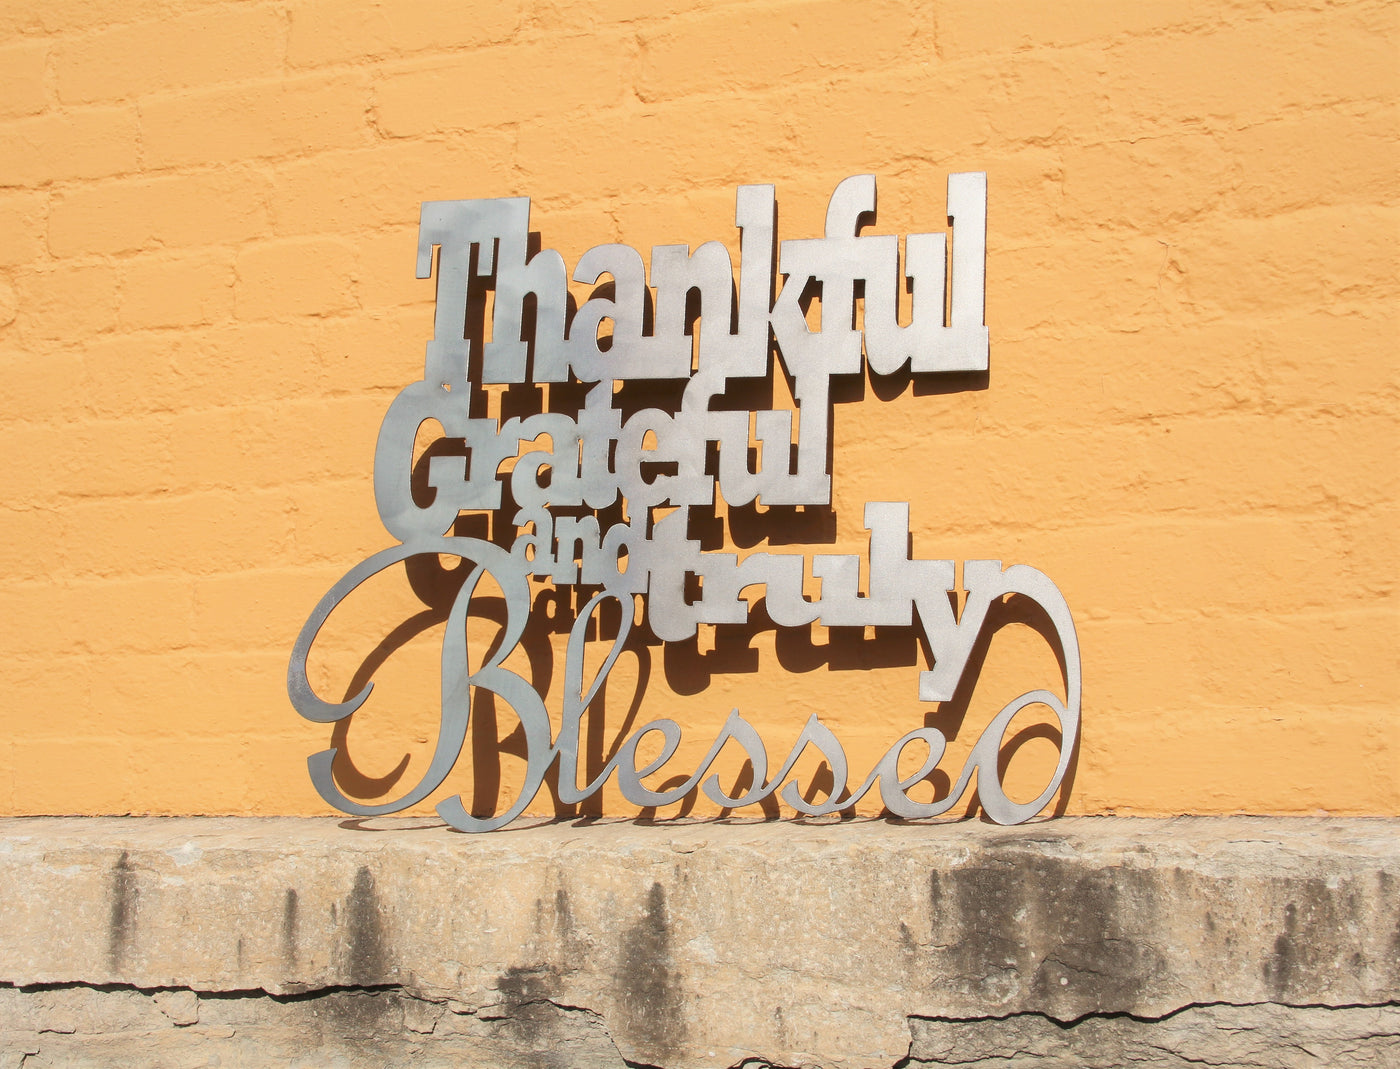 Thankful Grateful and Truly Blessed Metal Word Sign - Madison Iron and Wood - Wall Art - metal outdoor decor - Steel deocrations - american made products - veteran owned business products - fencing decorations - fencing supplies - custom wall decorations - personalized wall signs - steel - decorative post caps - steel post caps - metal post caps - brackets - structural brackets - home improvement - easter - easter decorations - easter gift - easter yard decor